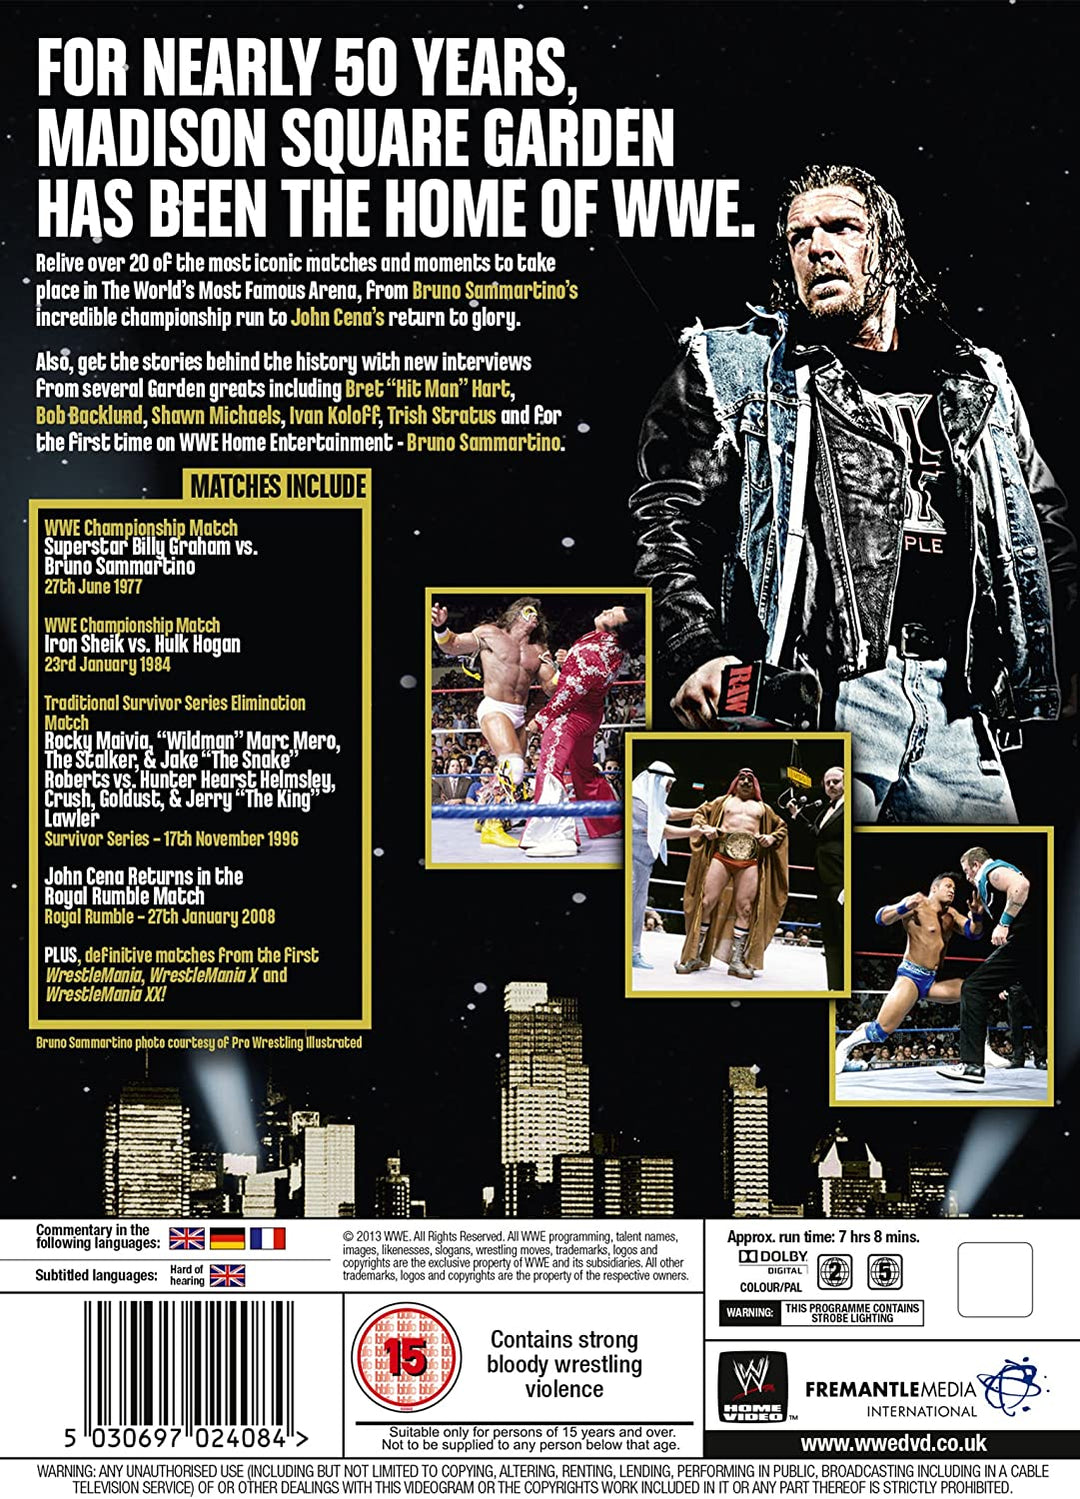 WWE: The Best Of WWE At Madison Square Garden  - Action [DVD]